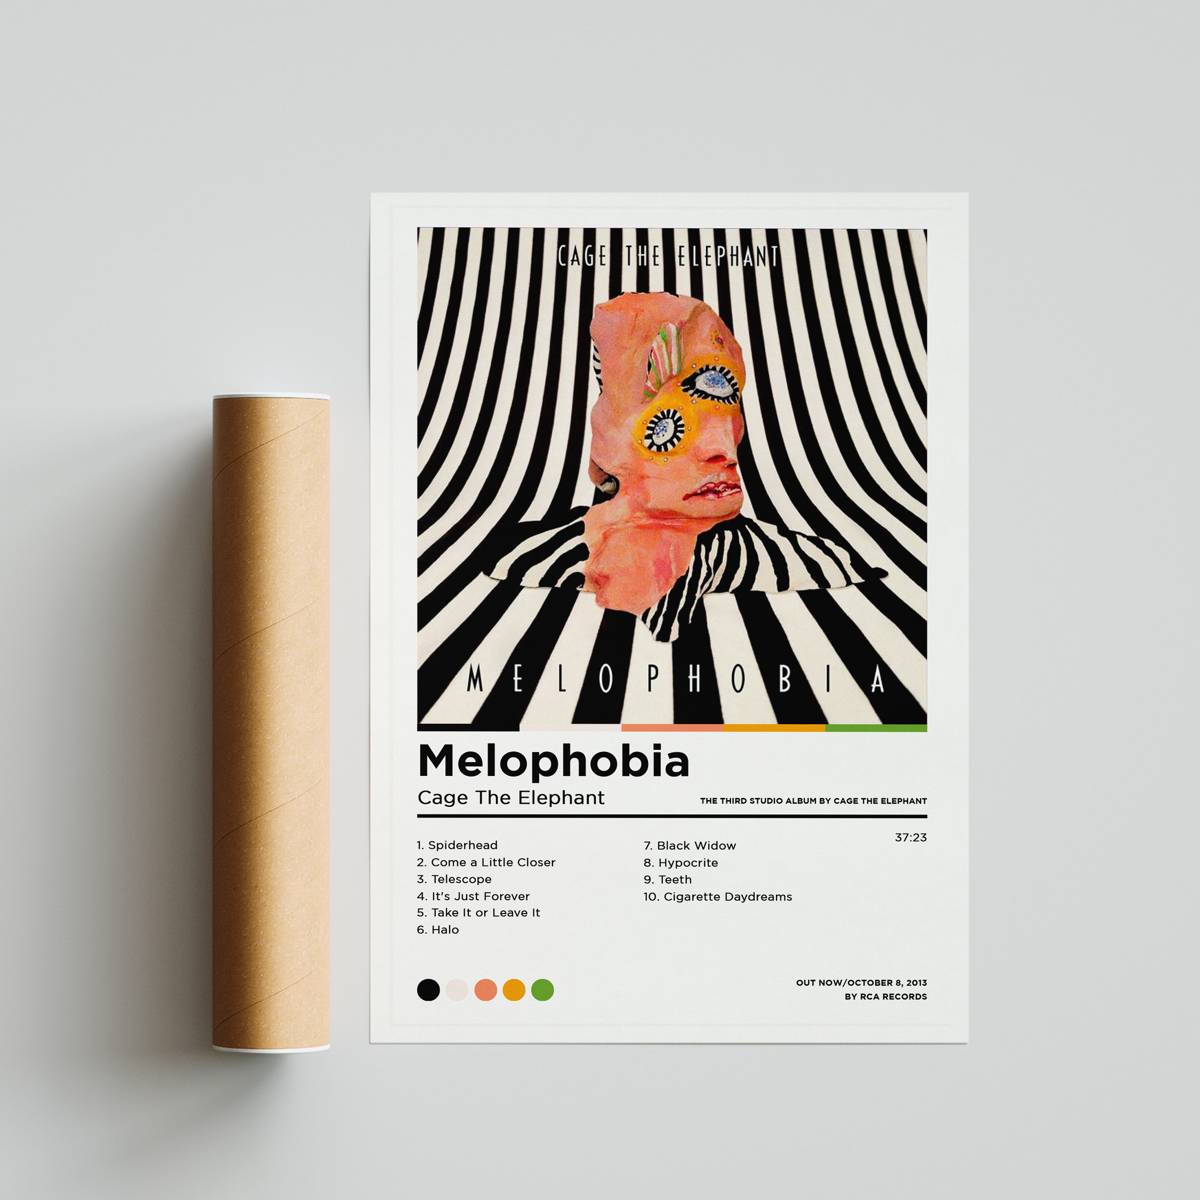 Cage The Elephant Posters - Melophobia Poster / Album Cover Poster ...